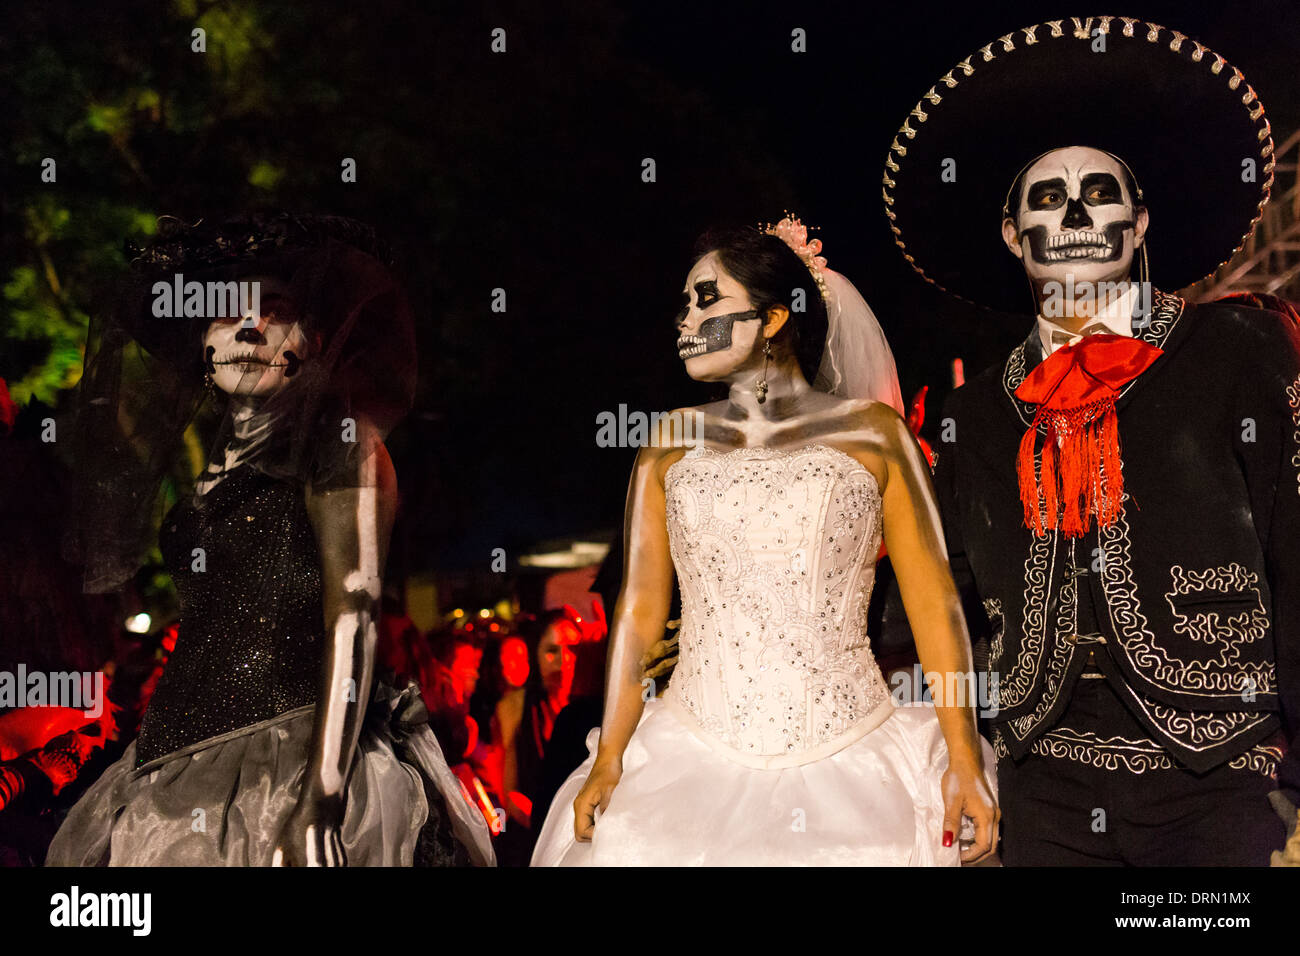 A group of young people disguised as skeletons appear in a performance about death. Stock Photo